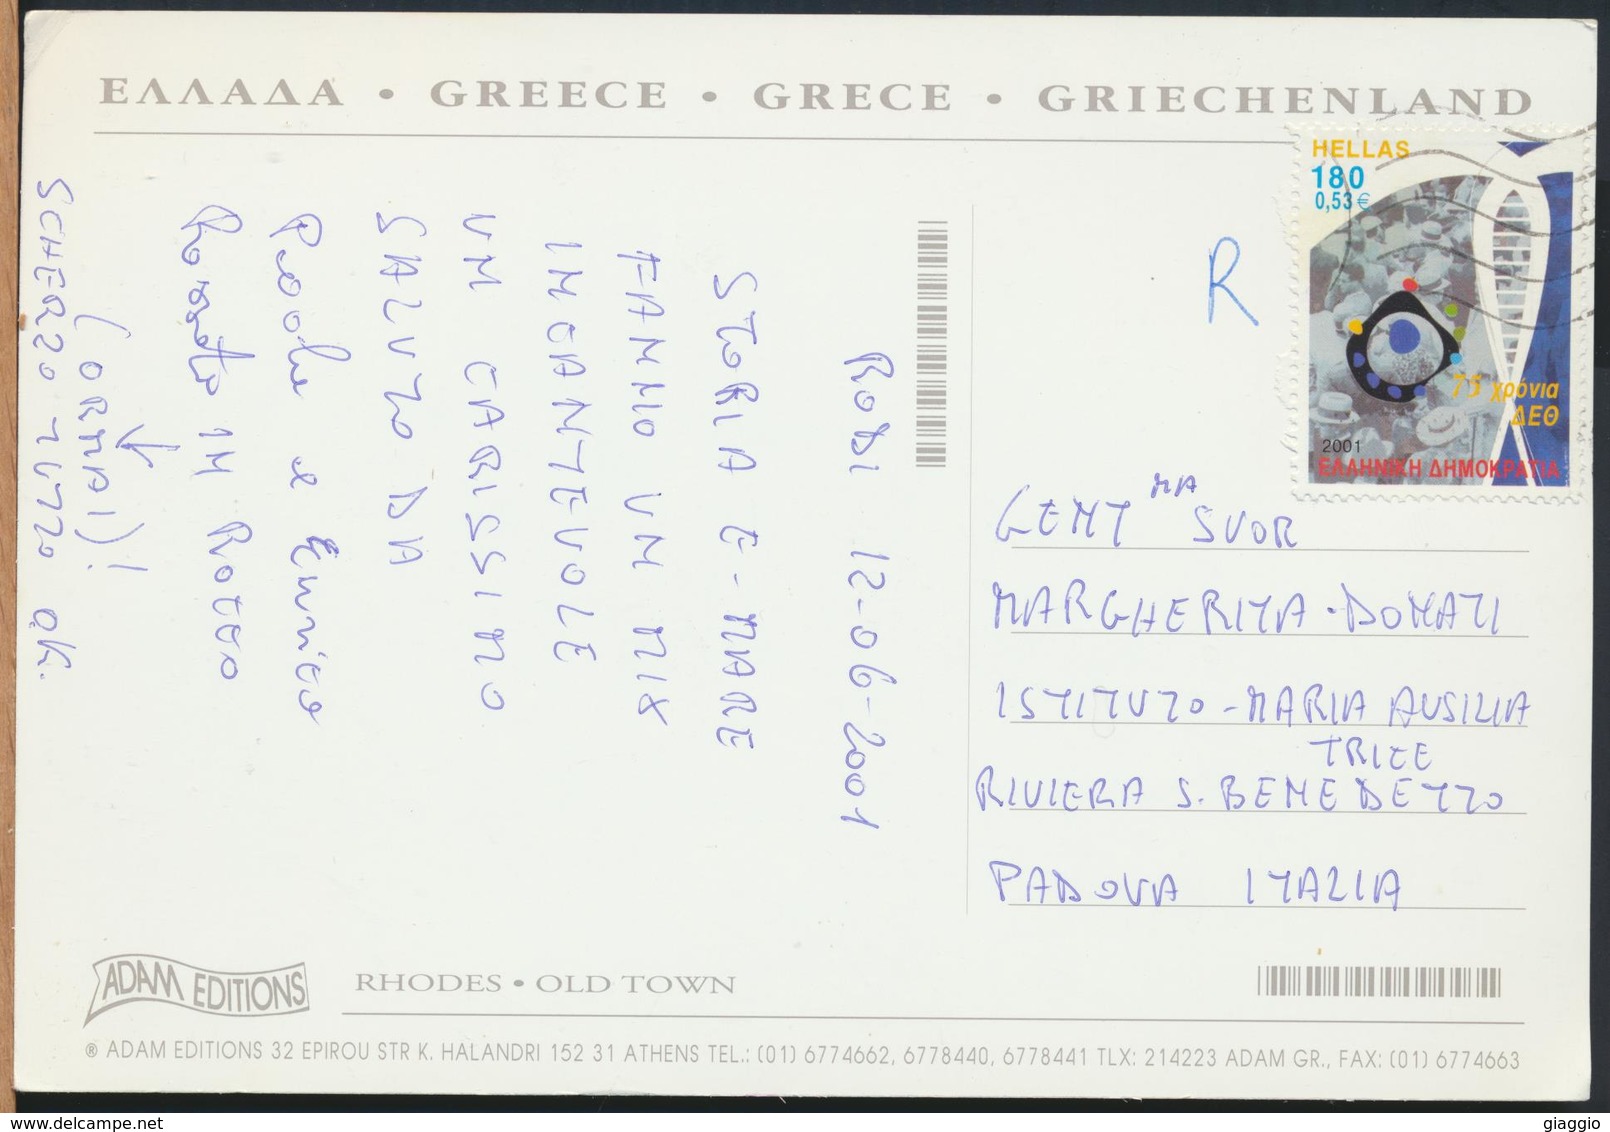 °°° GF603 - GREECE - RHODES OLD TOWN - 2001 With Stamps °°° - Grecia